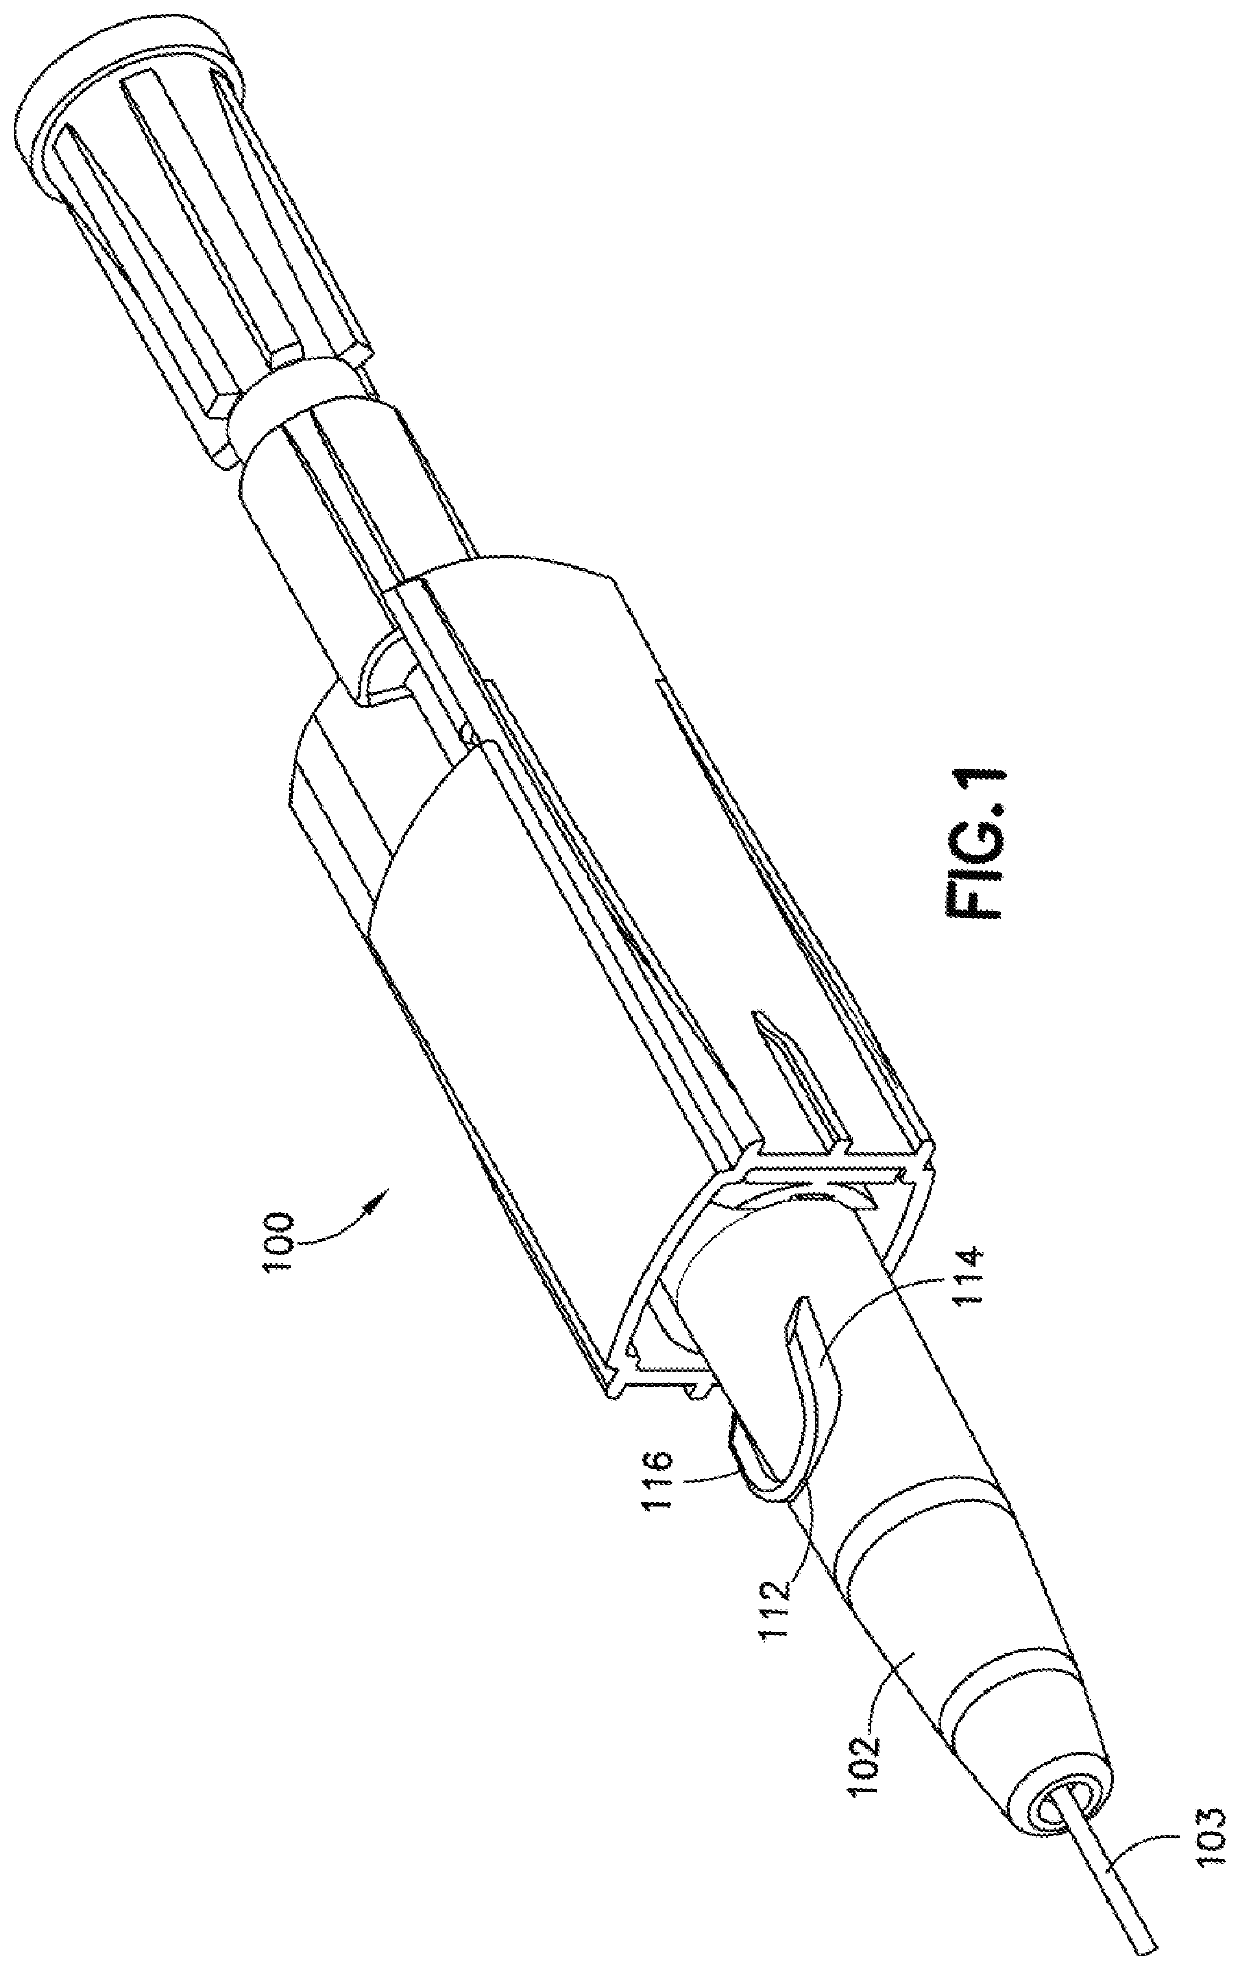 Medical device with Anti-rotation push tab